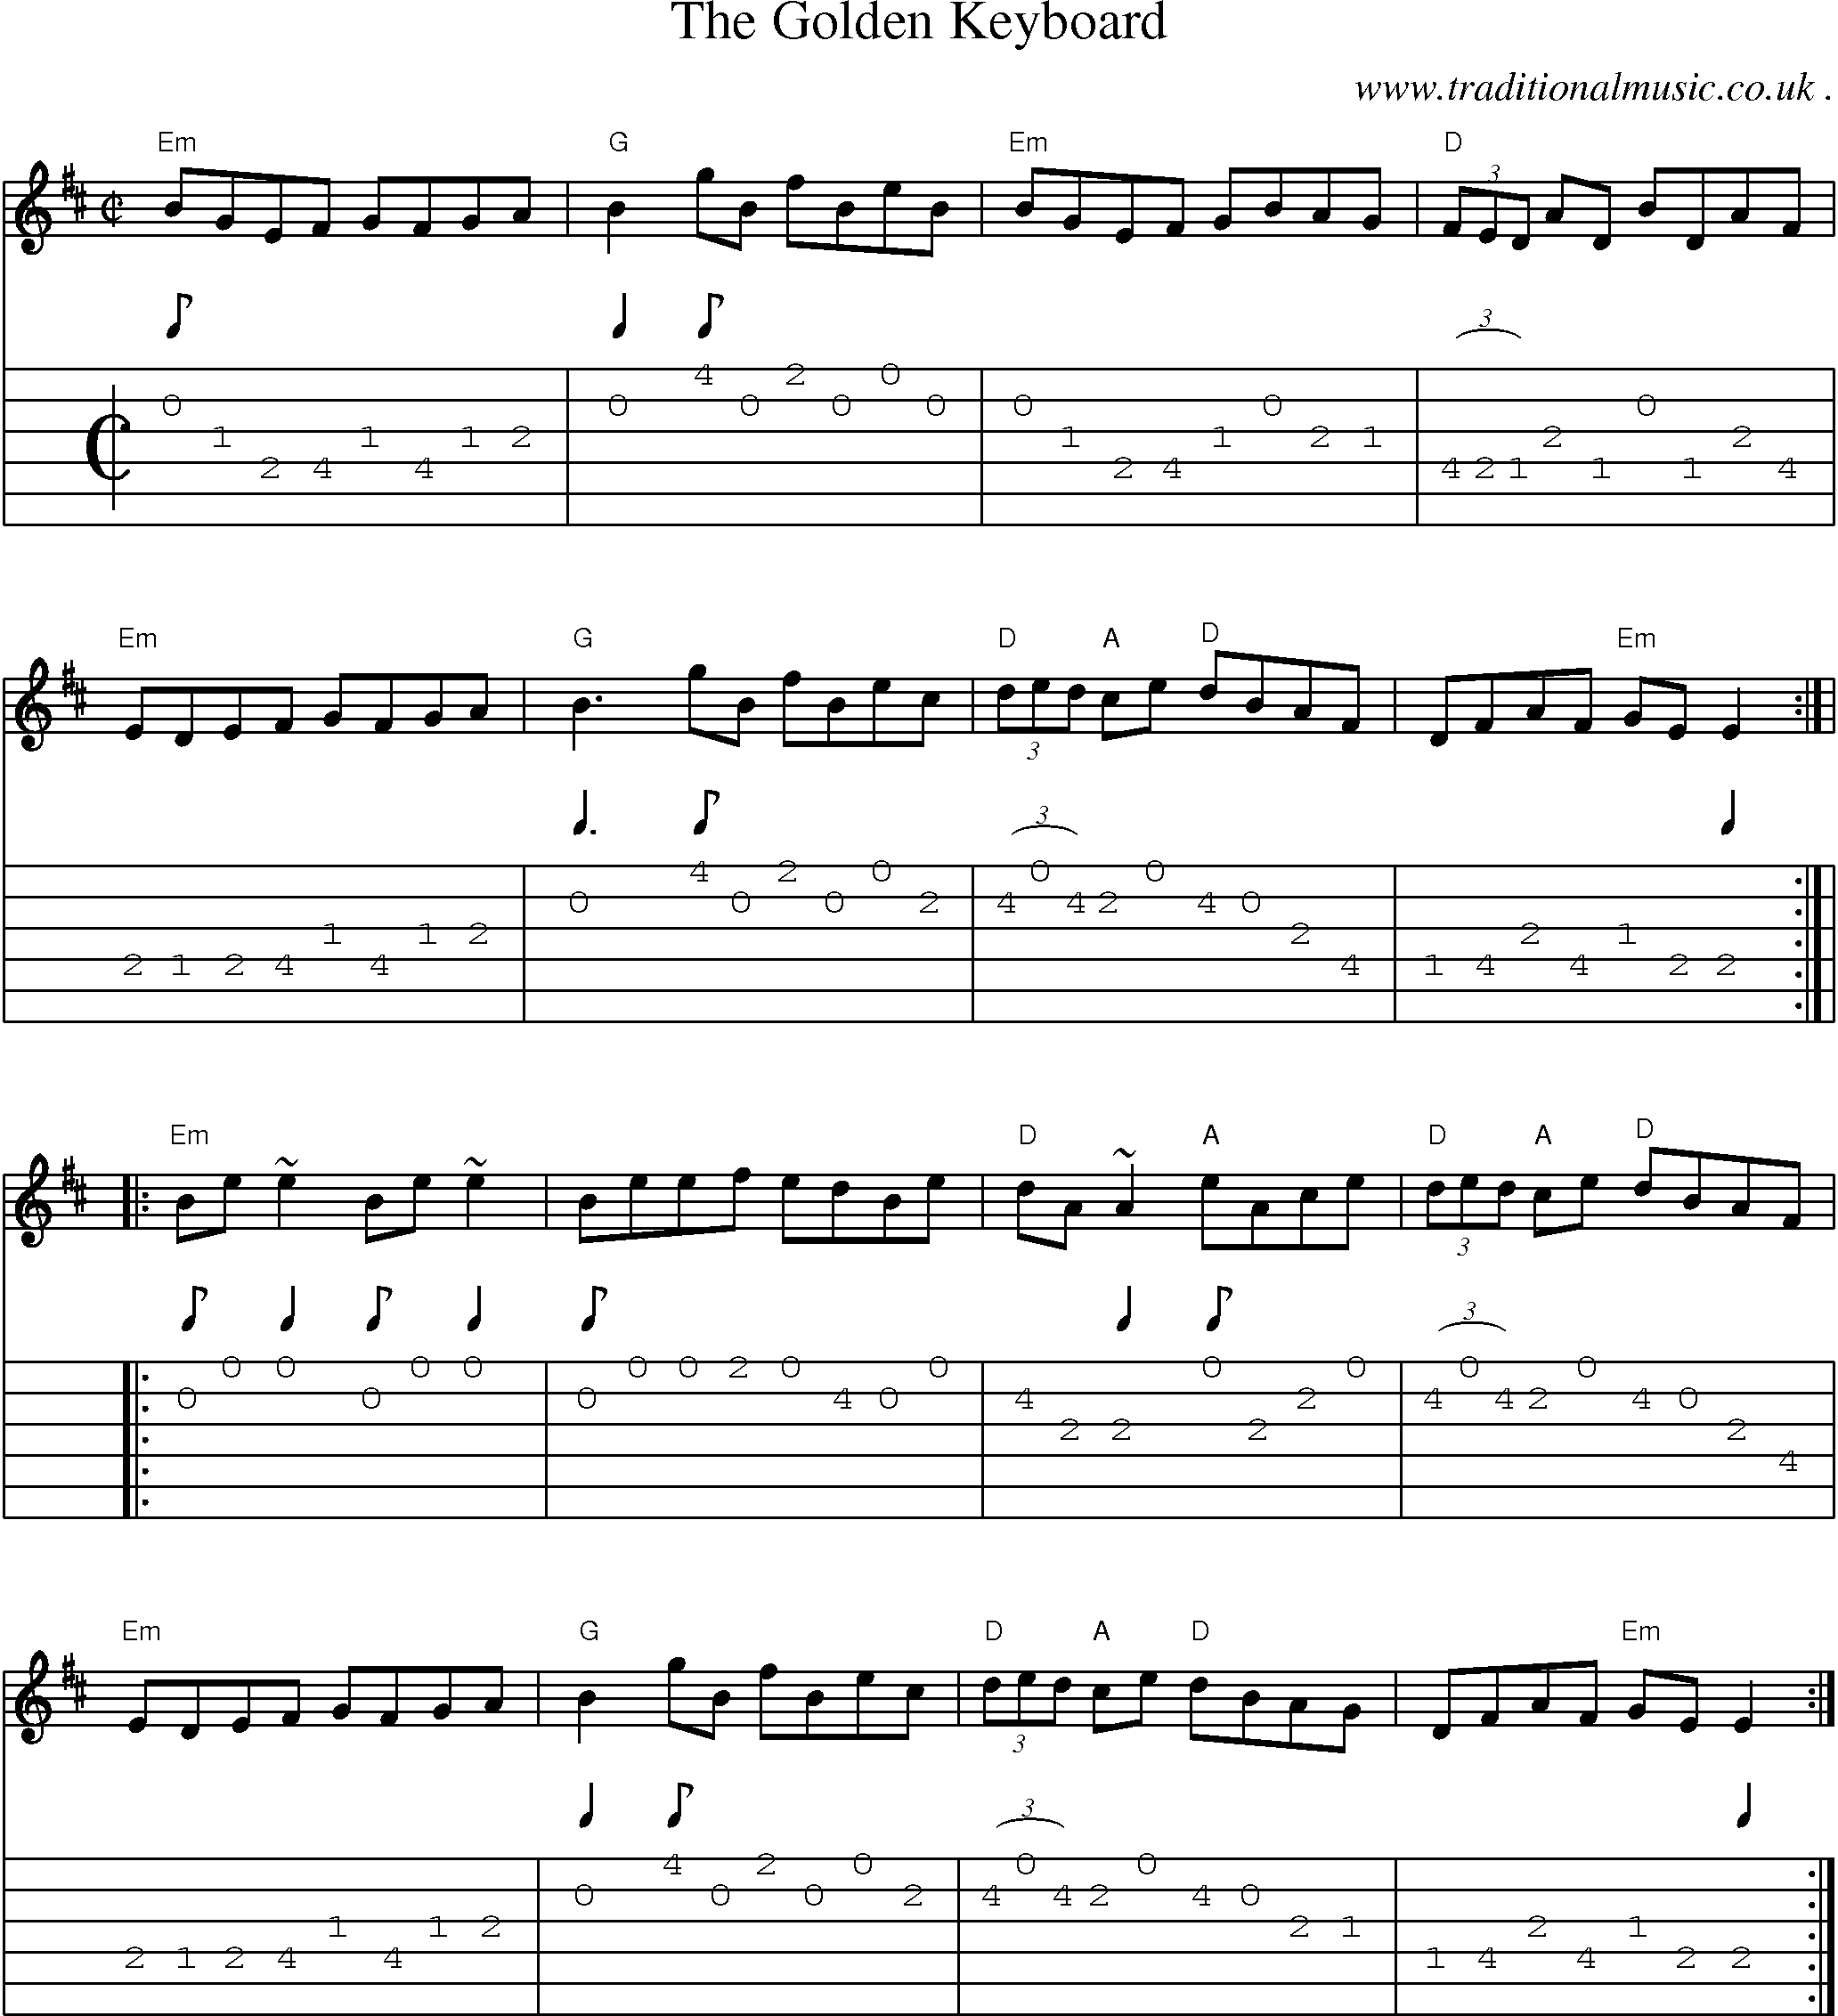 Sheet-music  score, Chords and Guitar Tabs for The Golden Keyboard